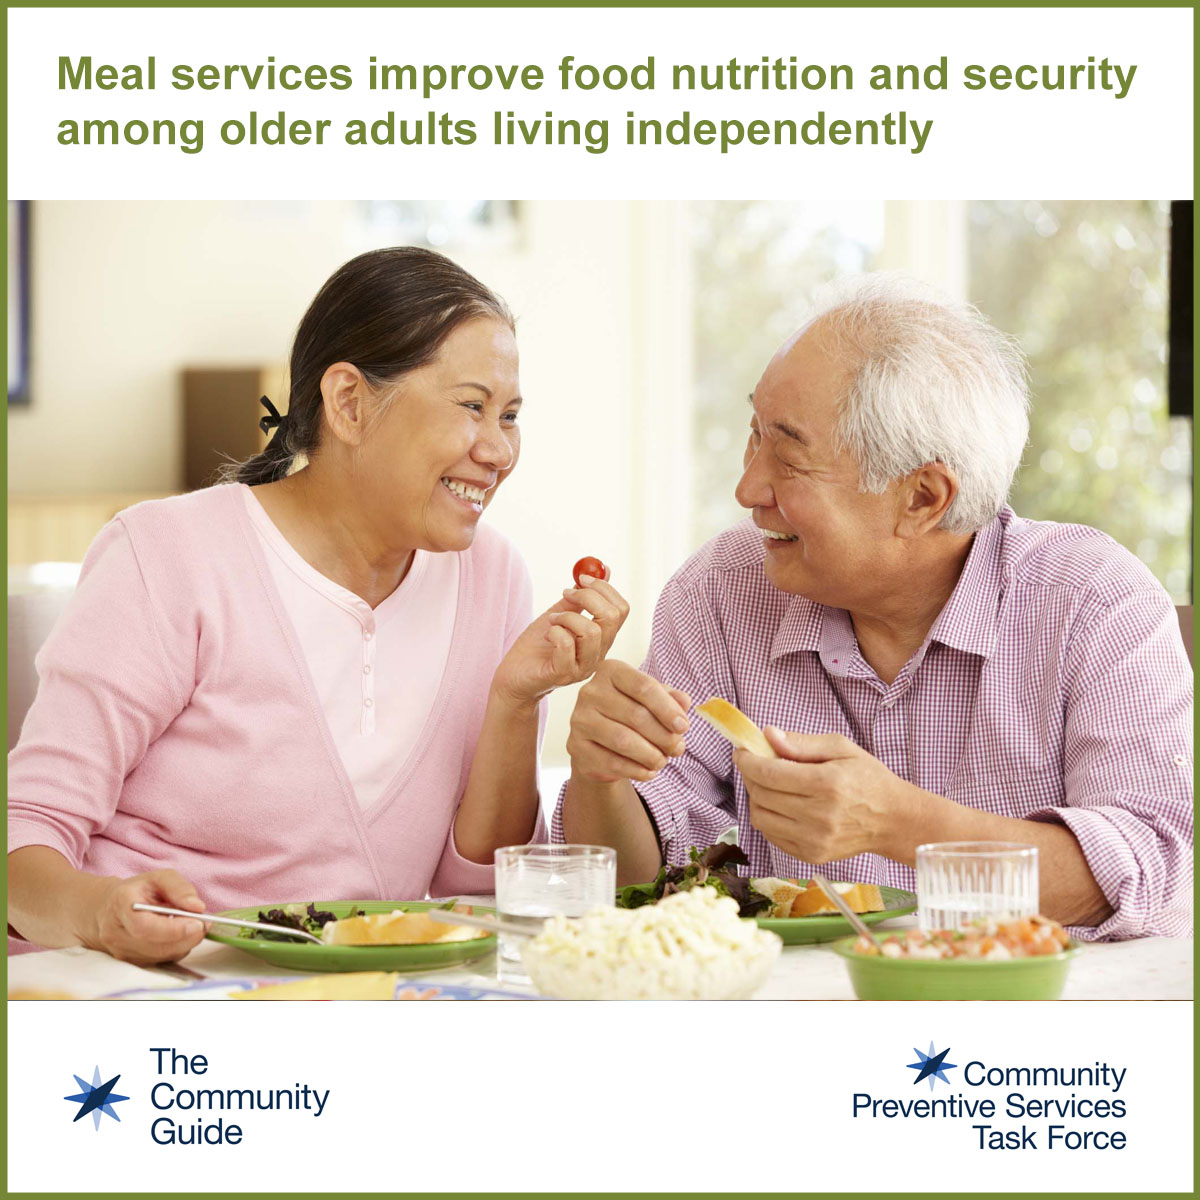 Use this image for social media to promote the CPSTF finding for Congregate Meal Services for Older Adults